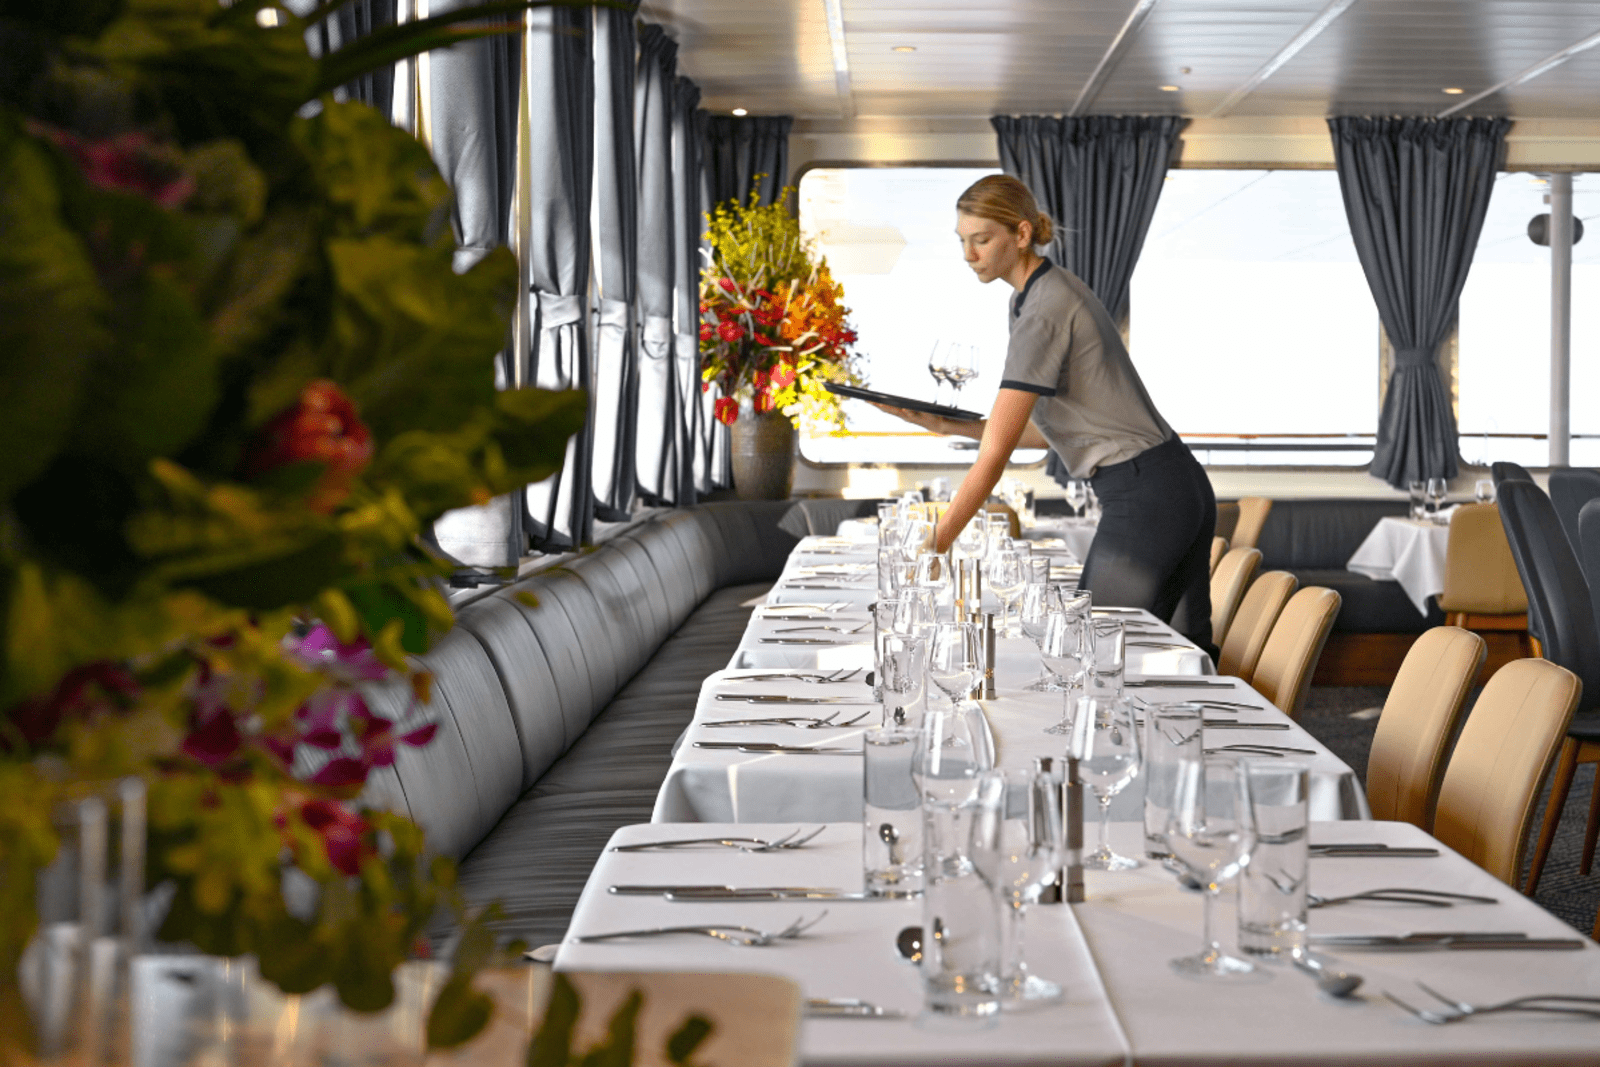 A woman sets places at a dining tables aboard a small cruise ship